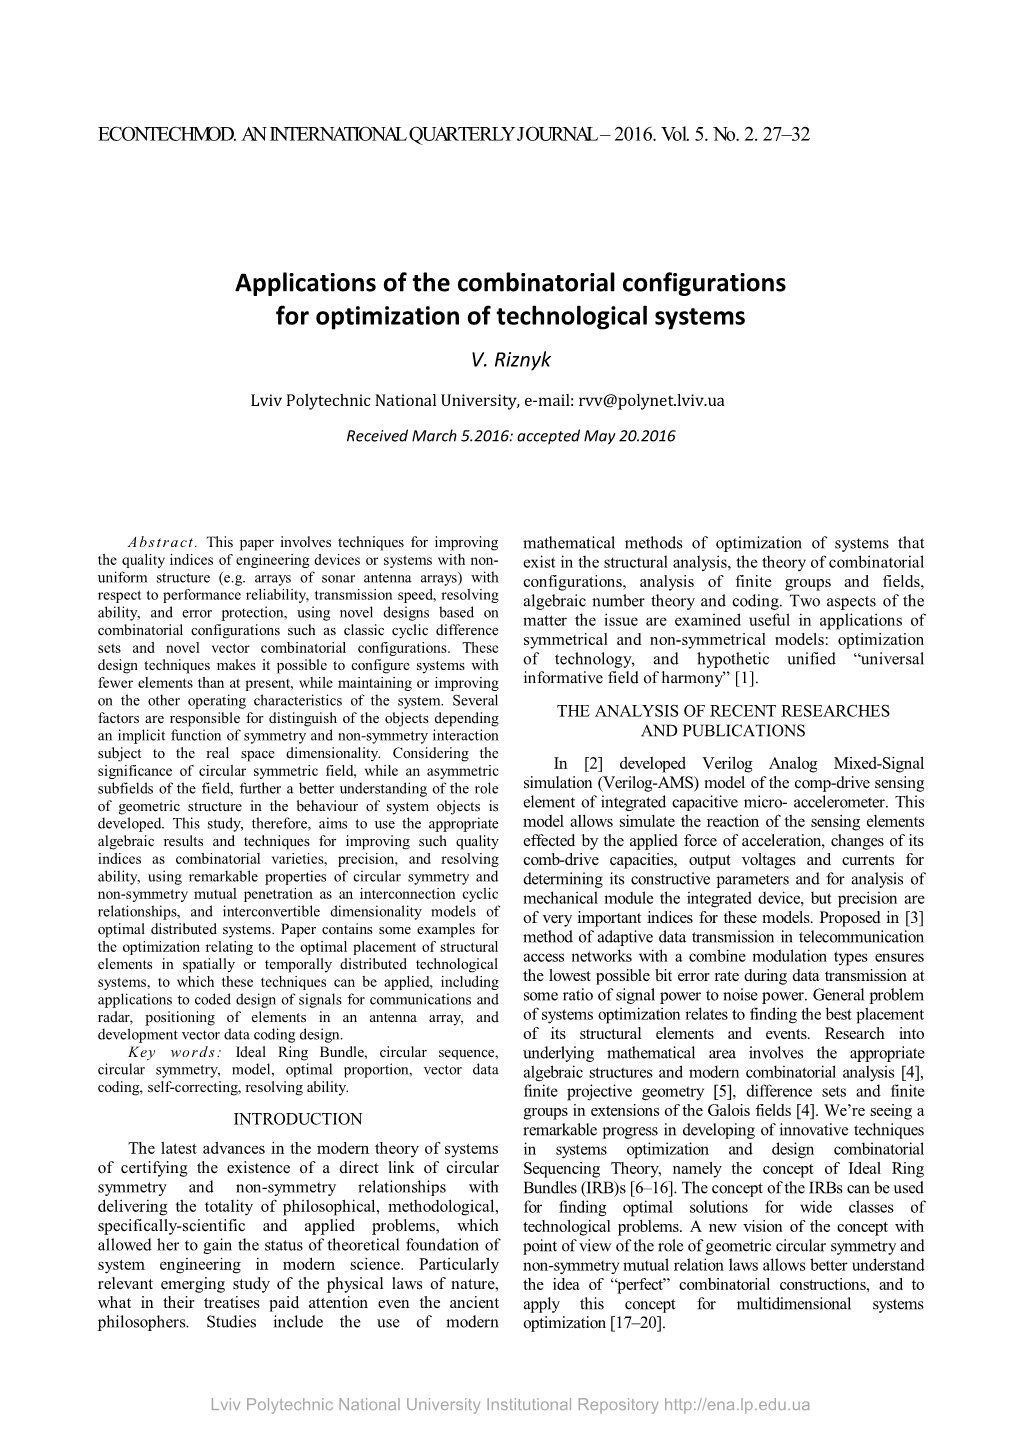 Applications of the Combinatorial Configurations for Optimization of Technological Systems V